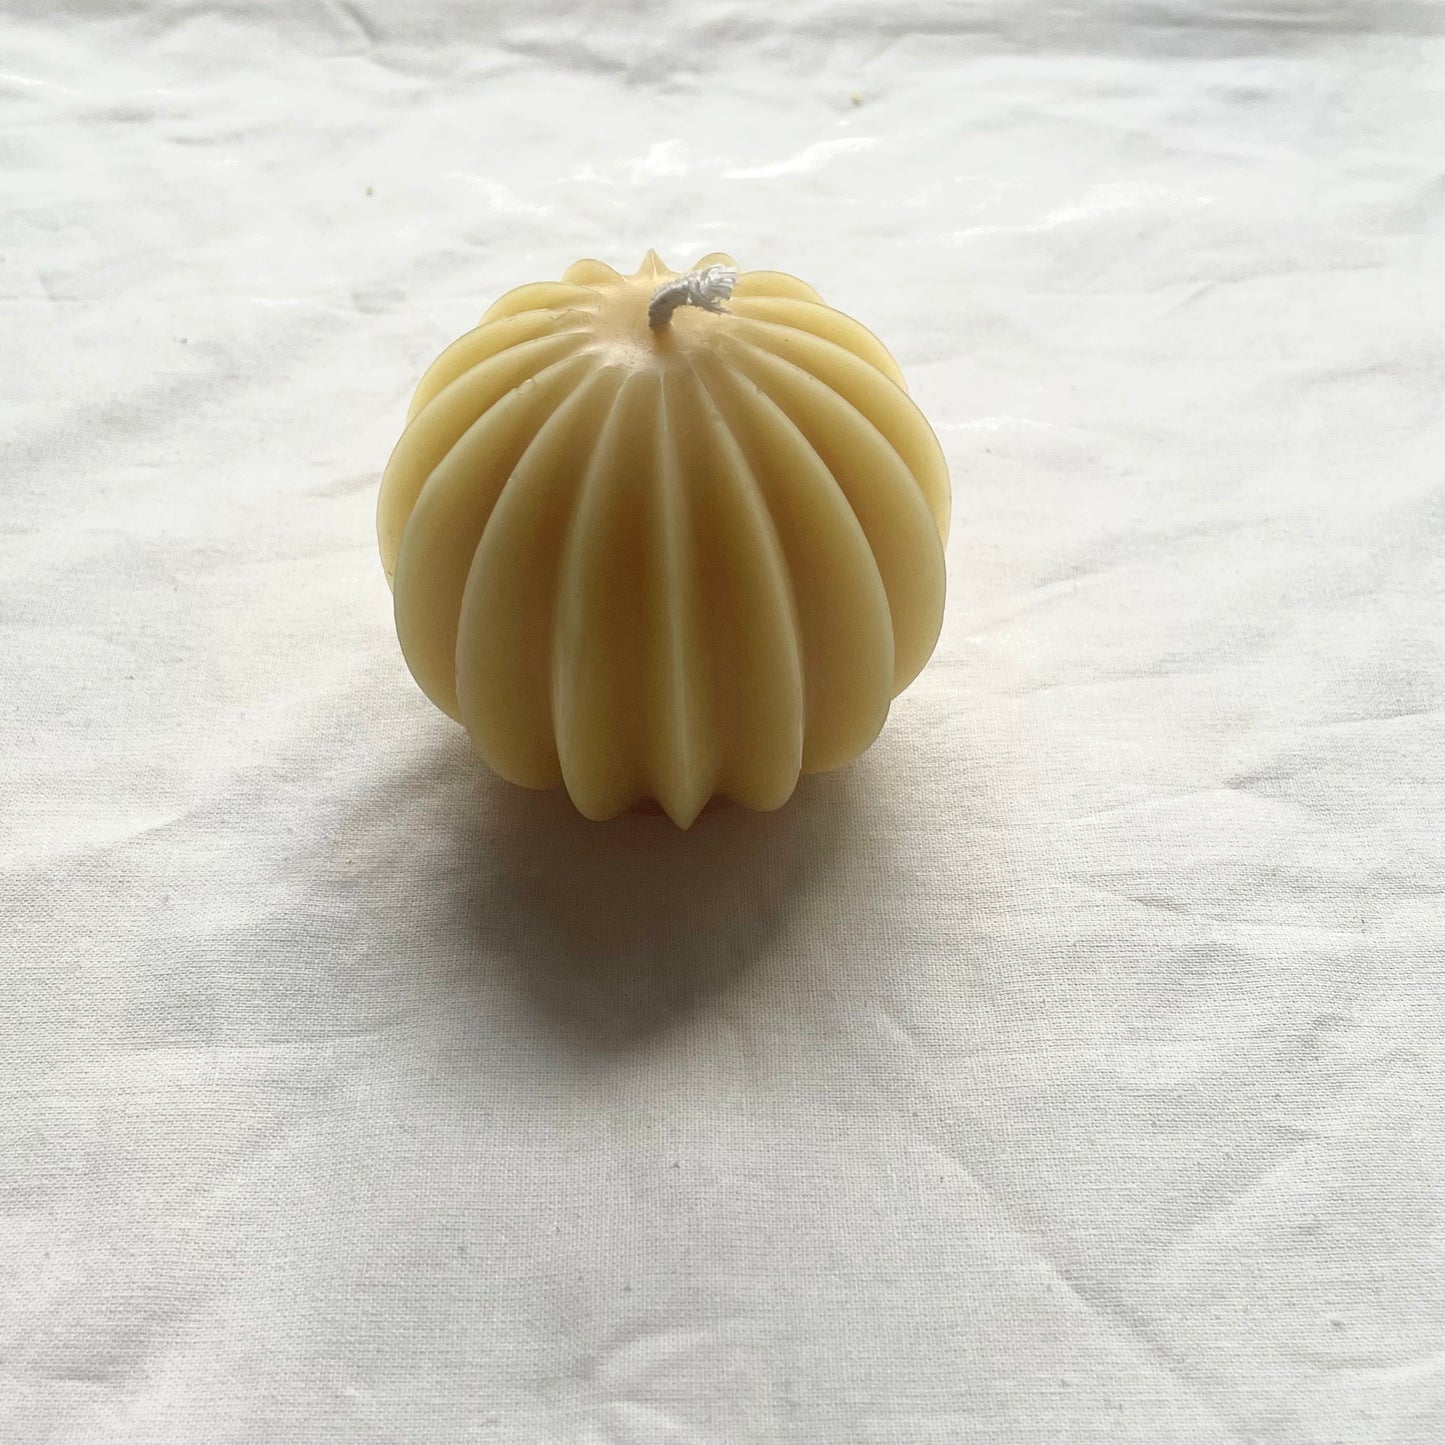 Ornament Candle - Pure Beeswax Christmas Ornament, Candle, / Beeswax Candle, Hand Filtered, Vintage Style